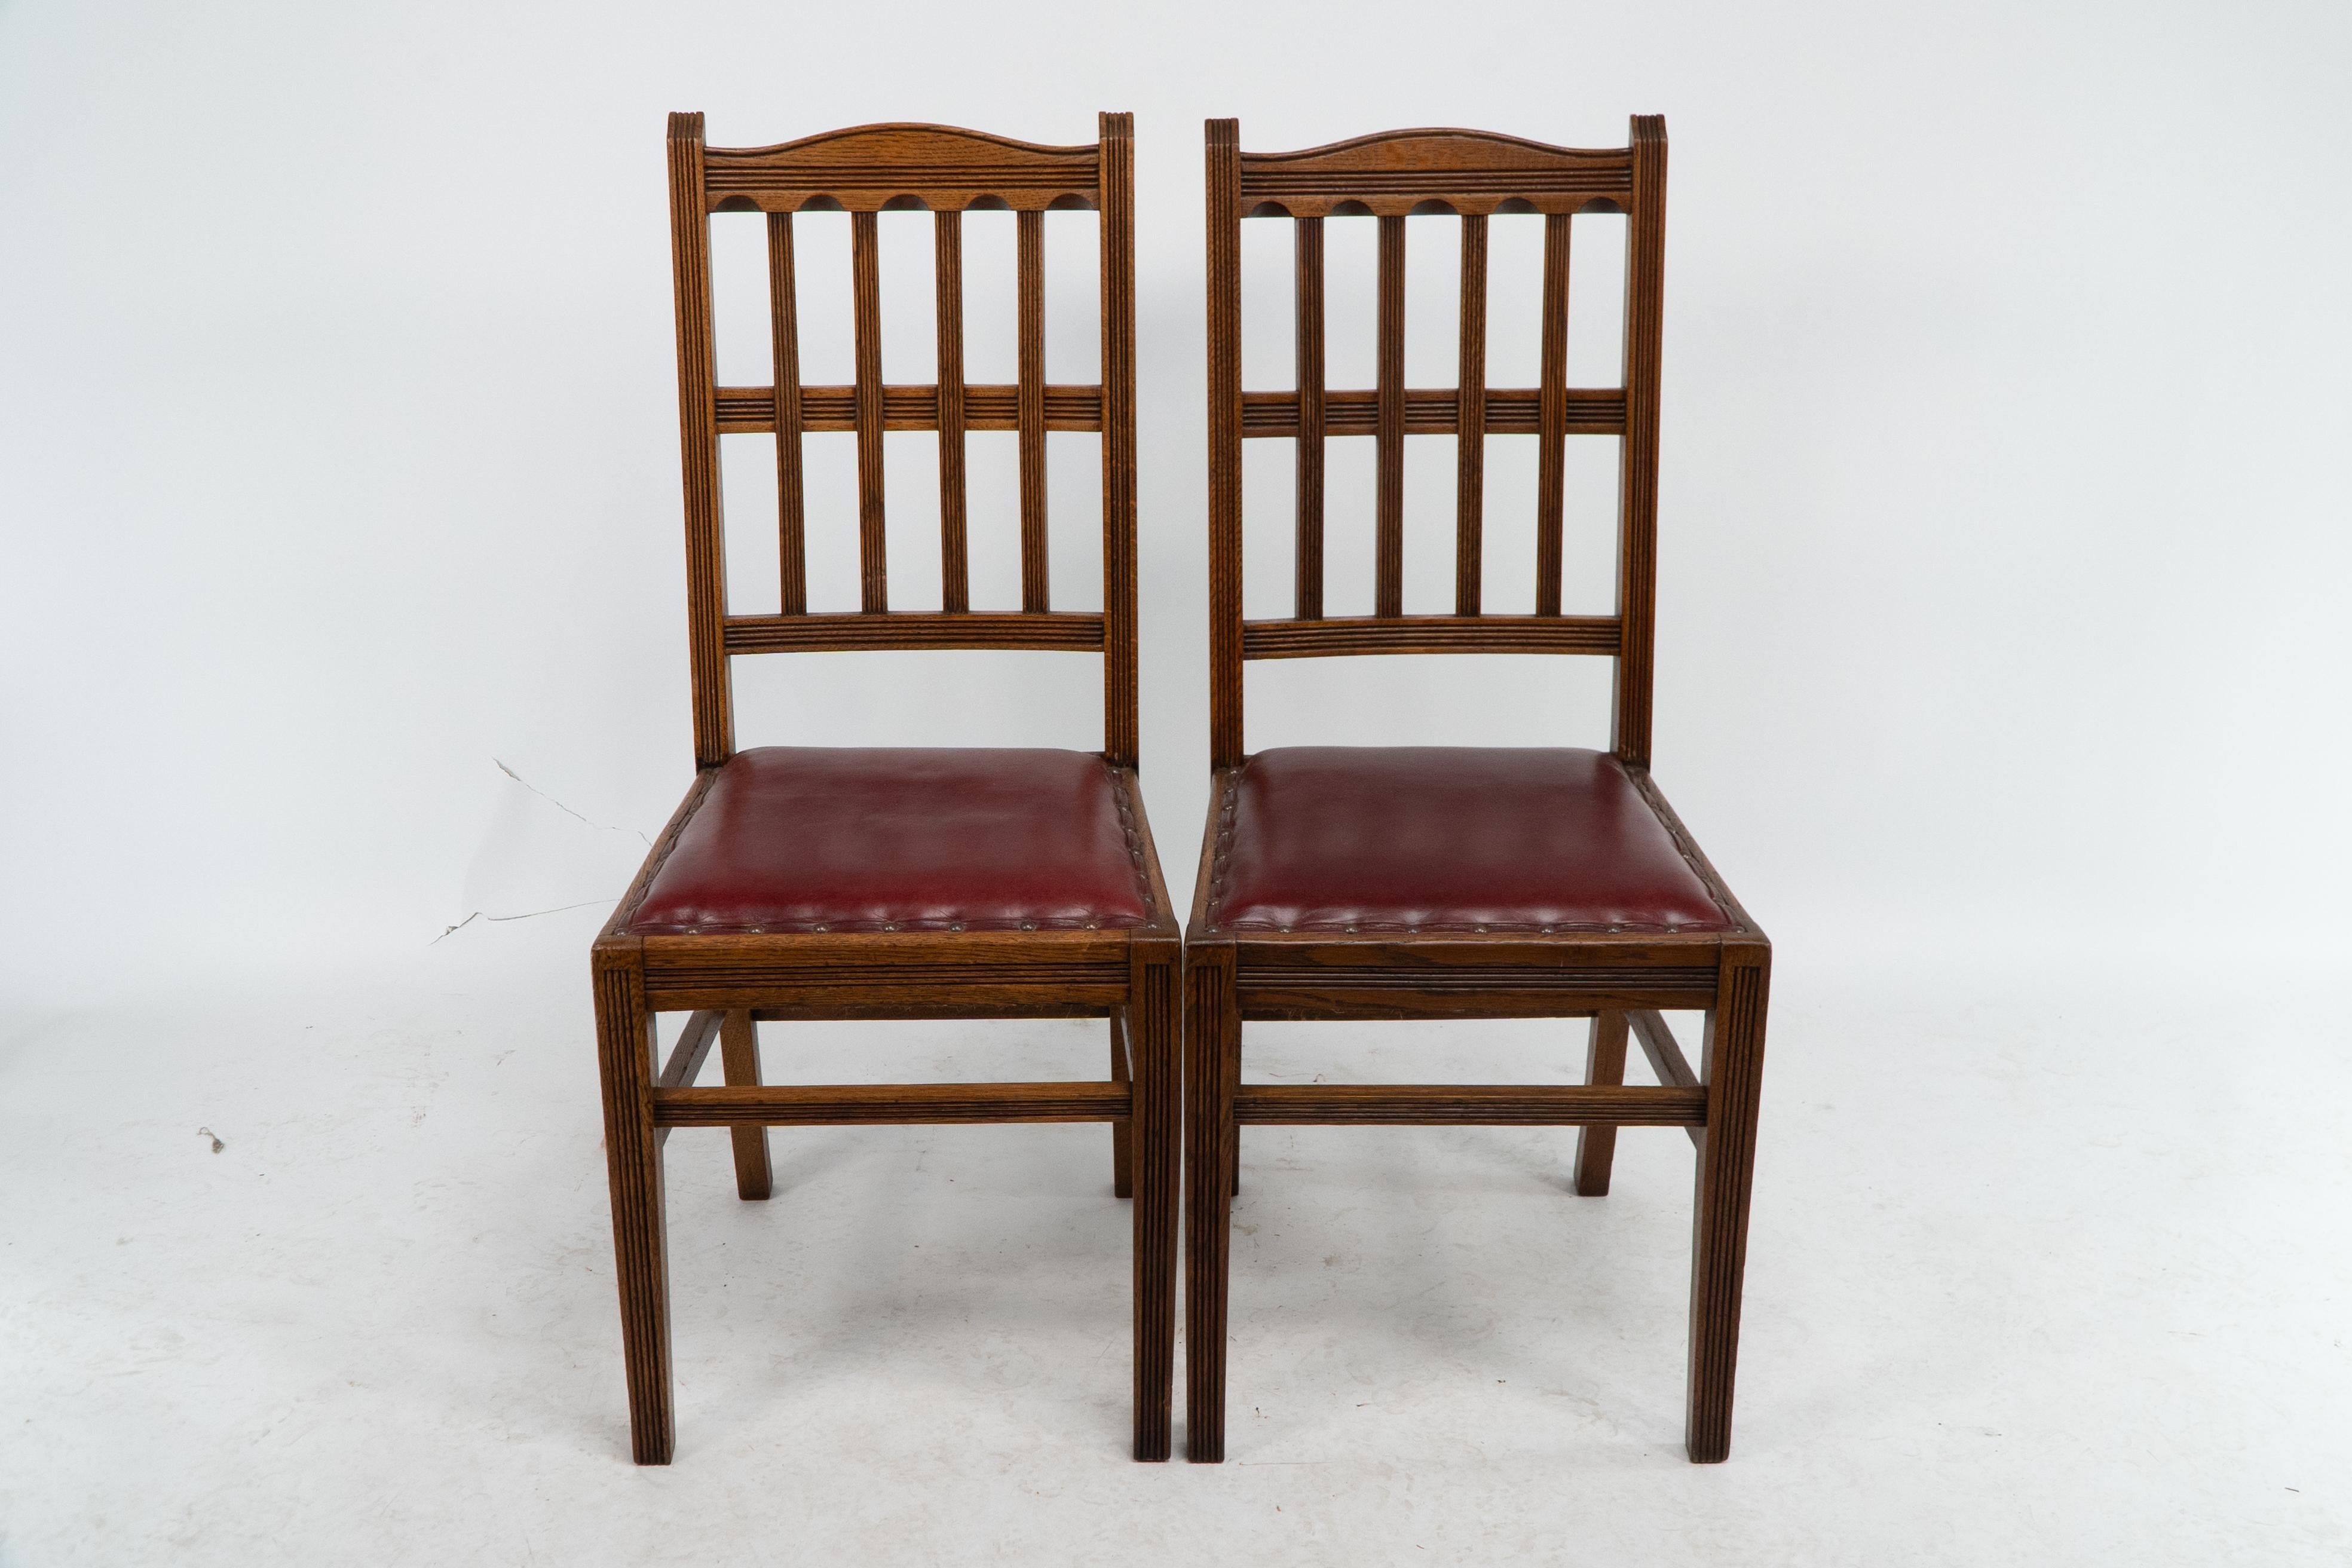 Jas Shoolbred attributed. A nice quality set of four Aesthetic Movement oak dining chairs with lattice designs to the backs and tramline details throughout, professionally reupholstered in a quality hide
